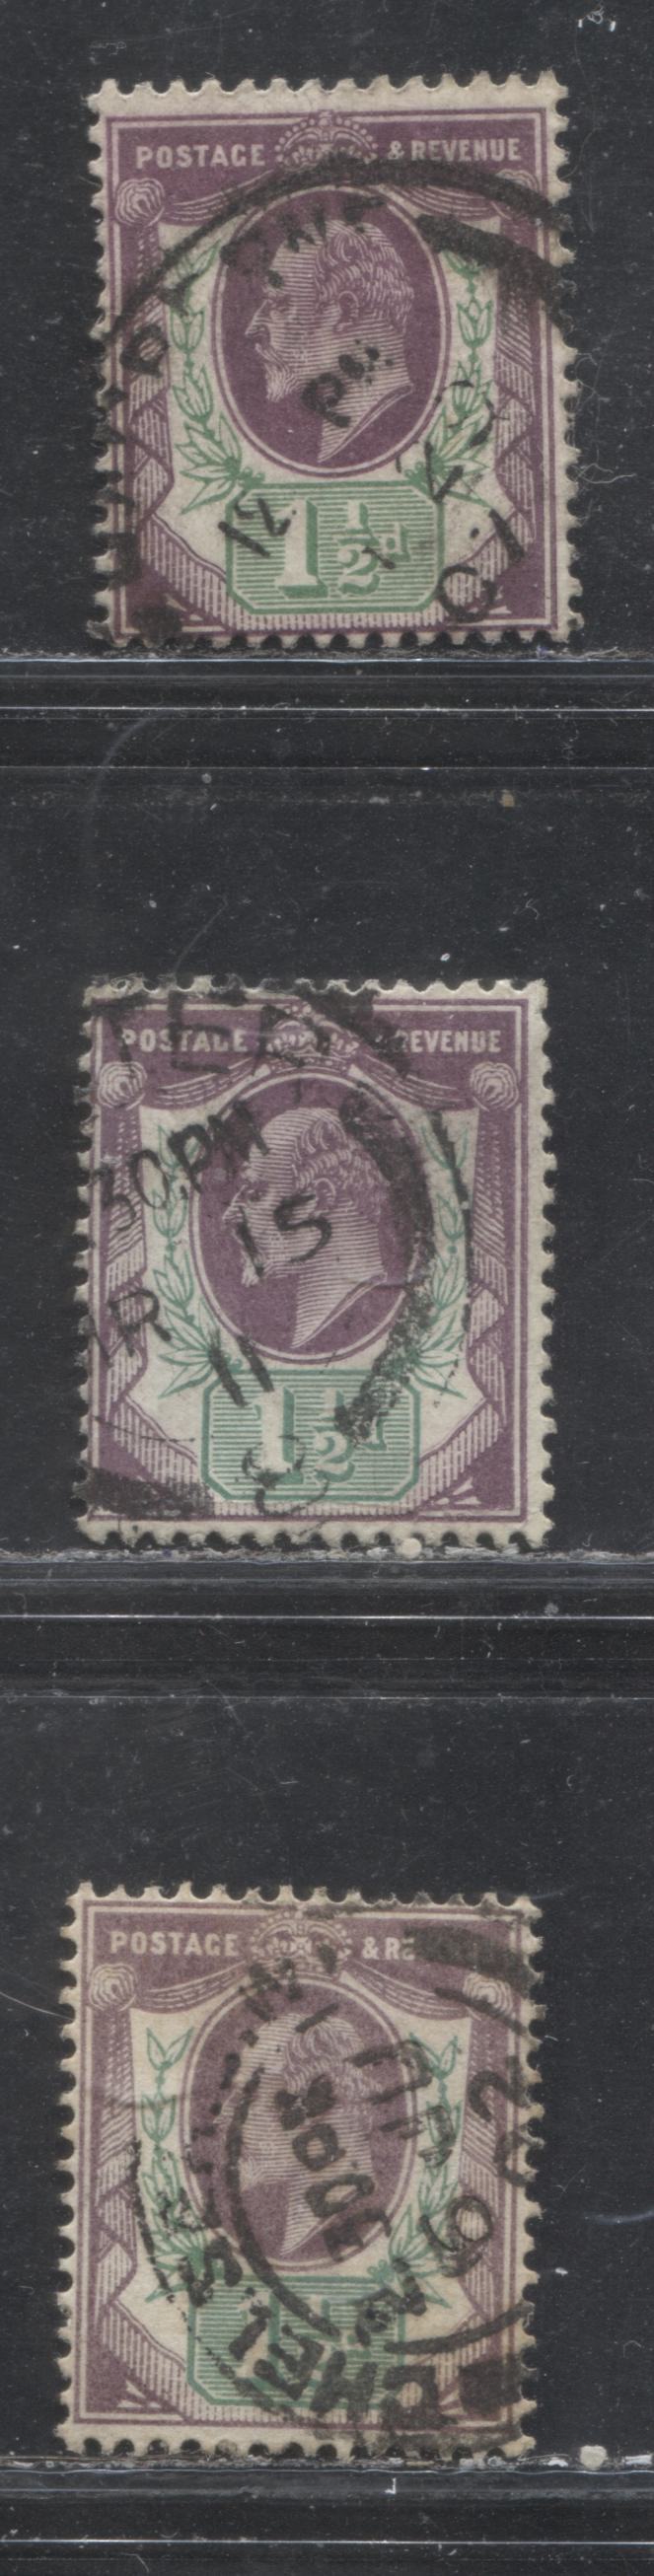 Lot 223 Great Brittain SG#223-224 1.5d Dull Purple & Green King Edward VII, 1902-1910 De La Rue Keyplate Issue, 3 VG Used Singles, Imperial Crown Watermark, Ordinary & Chalk Surfaced Papers, Perf. 14, Including Three Listed Shades